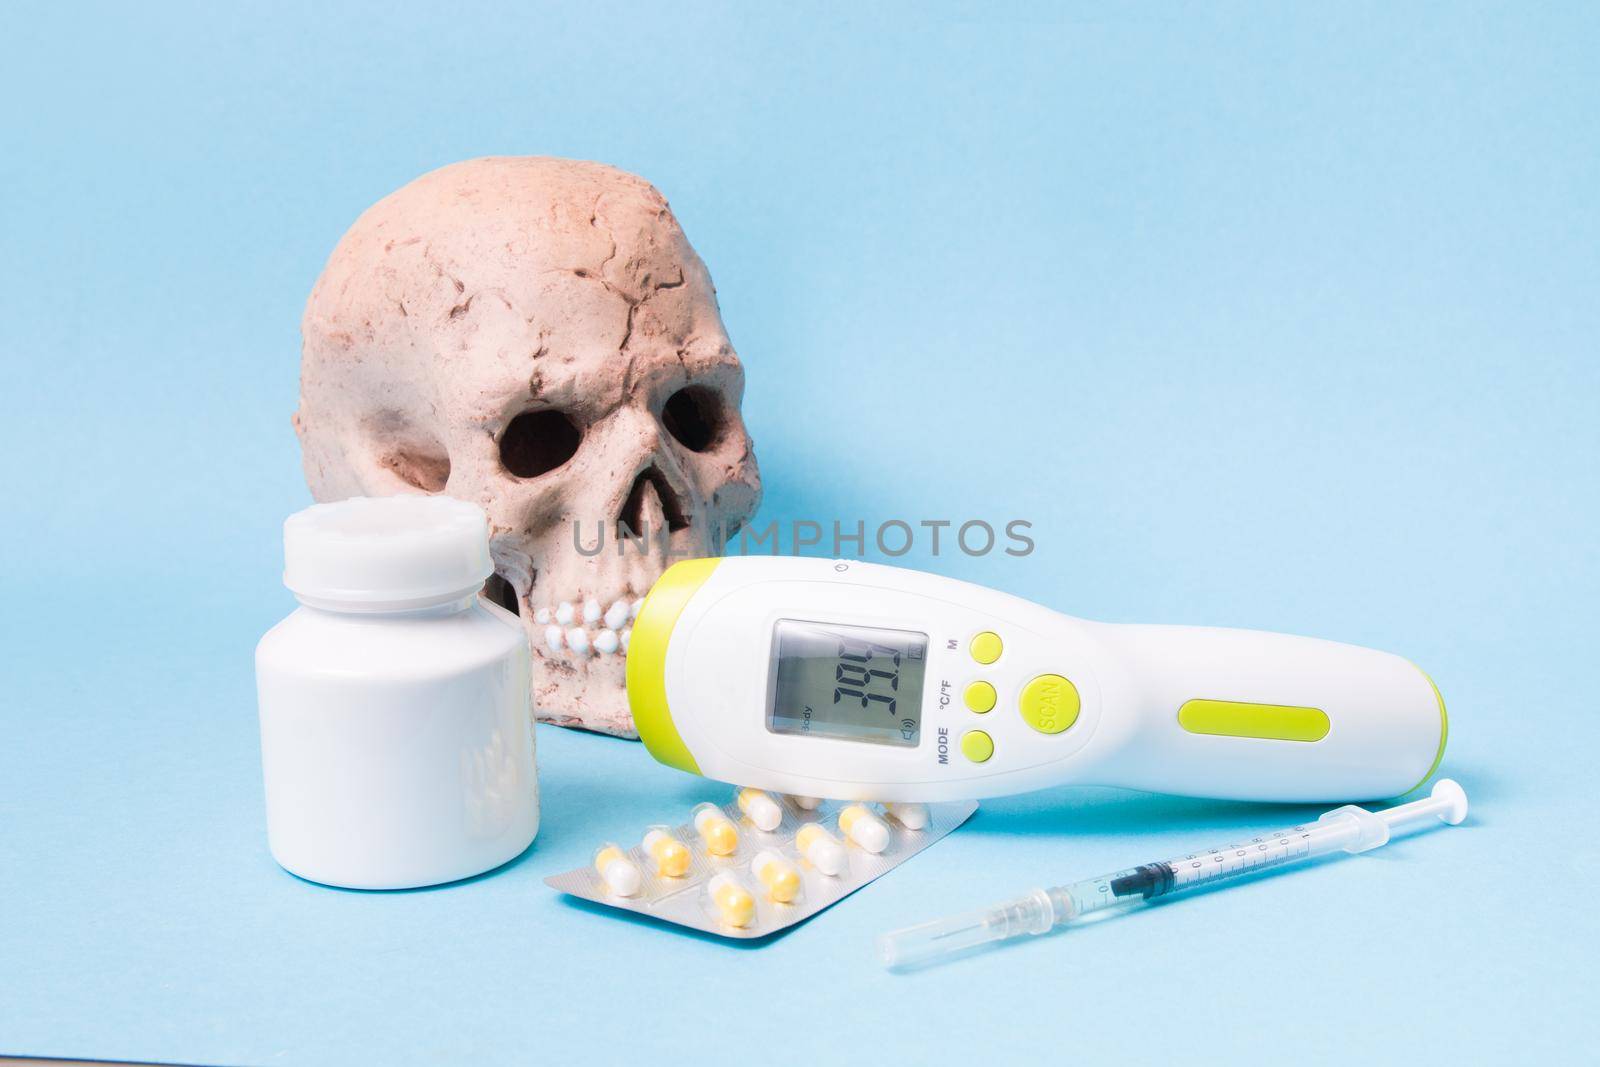 pills, drugs, syringe, infrared non-contact thermometer and ceramic skull in a protective medical face mask on a blue background, copy space, high temperature concept